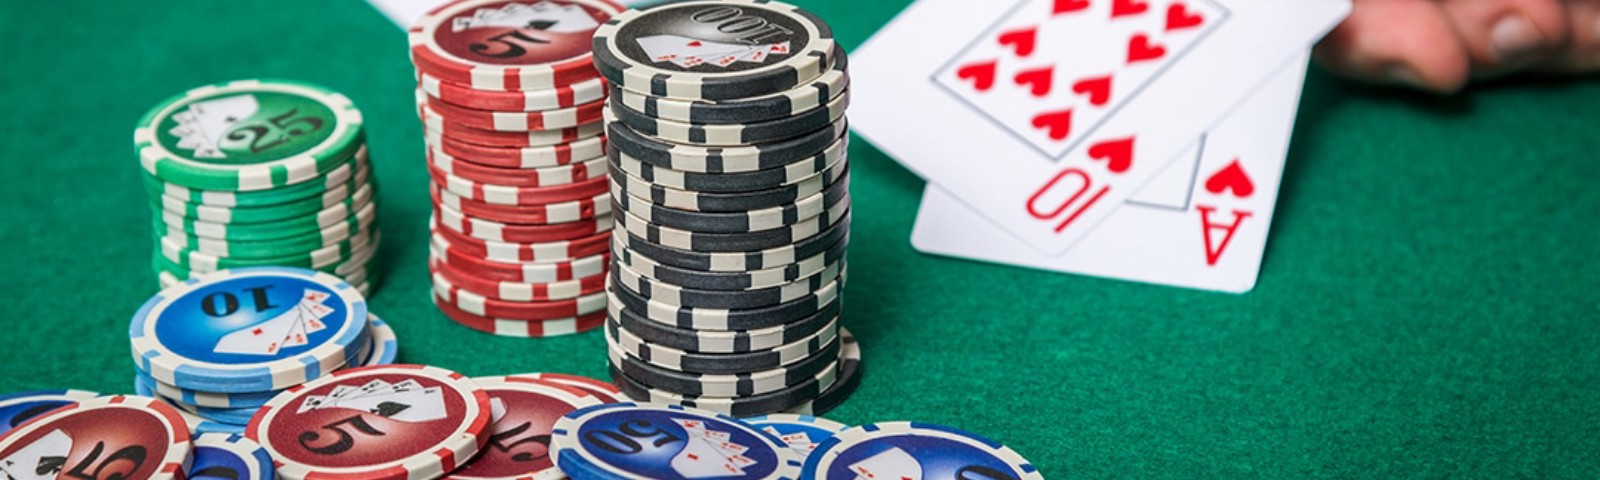 Typical mistakes when learning poker